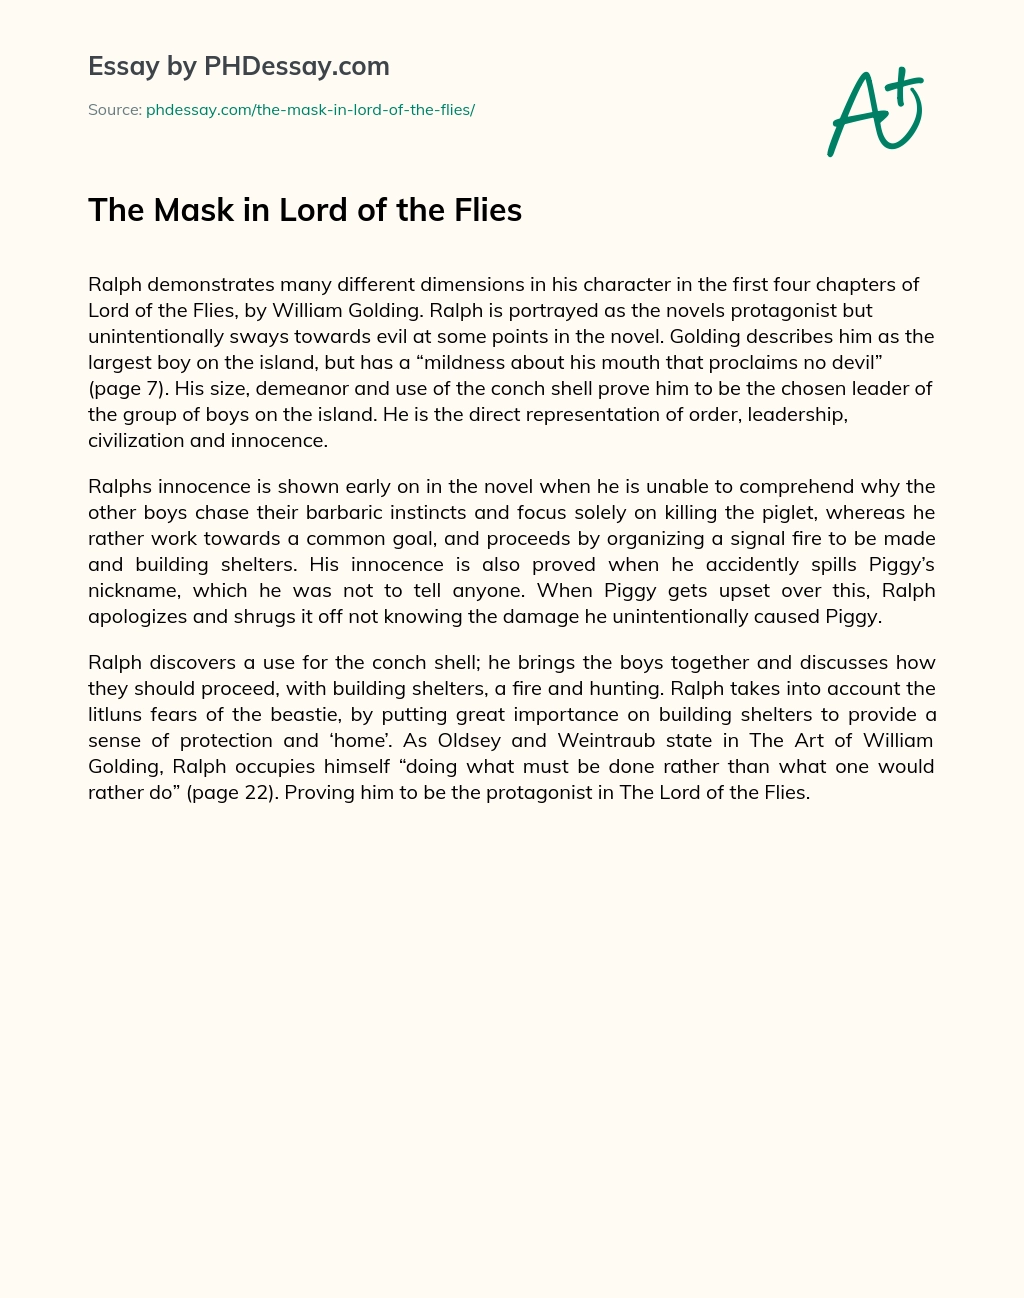 lord of the flies mask